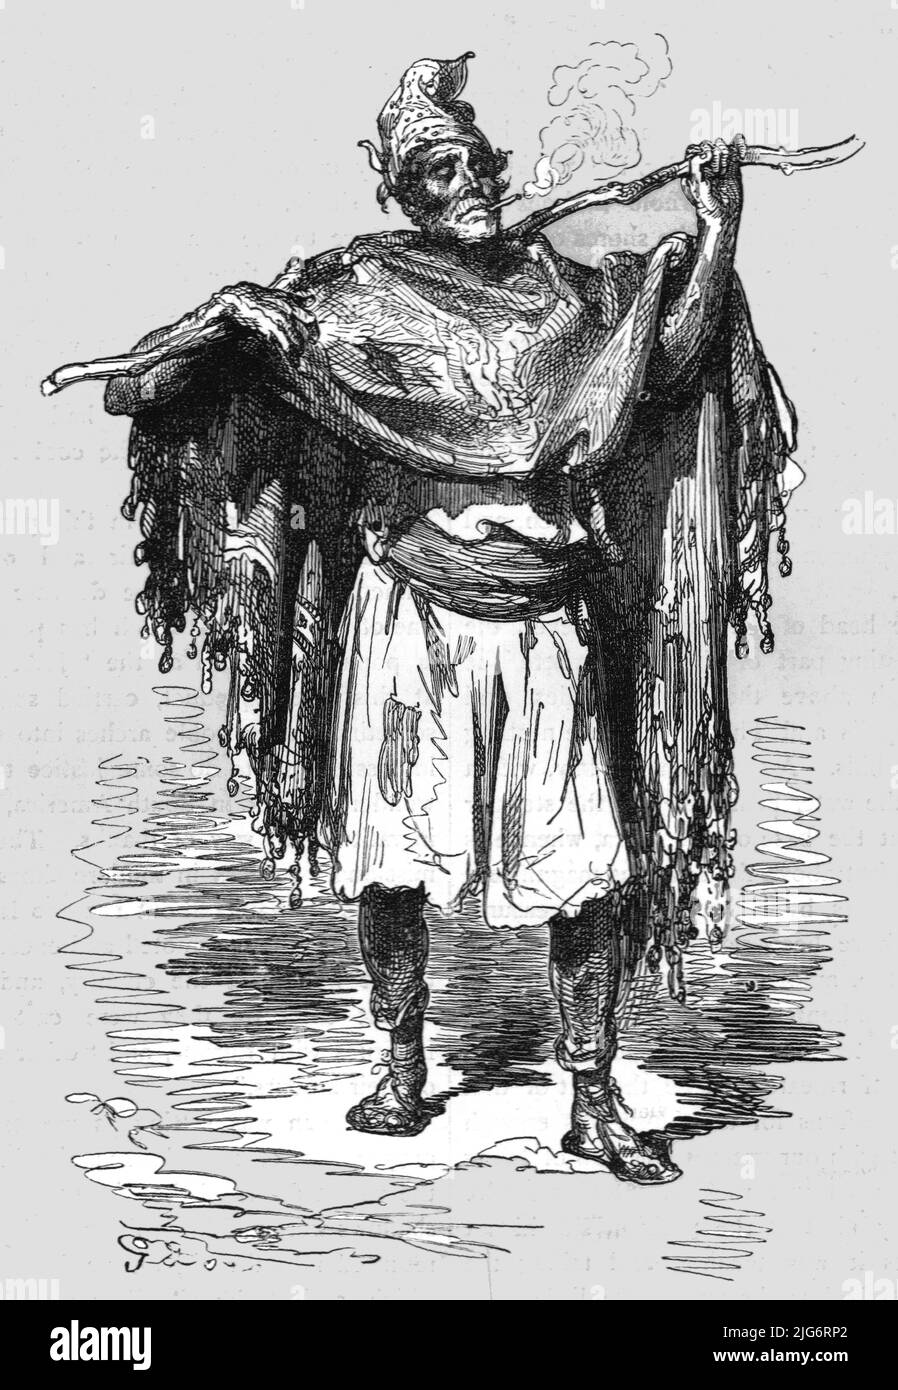 'Countryman of the Neighbourhood of Seville; An Autumn Tour in Andalusia', 1875. [Spanish man in traditional dress]. From, 'Illustrated Travels' by H.W. Bates. [Cassell, Petter, and Galpin, c1880, London] Belle Sauvage Works.London E.C. Stock Photo